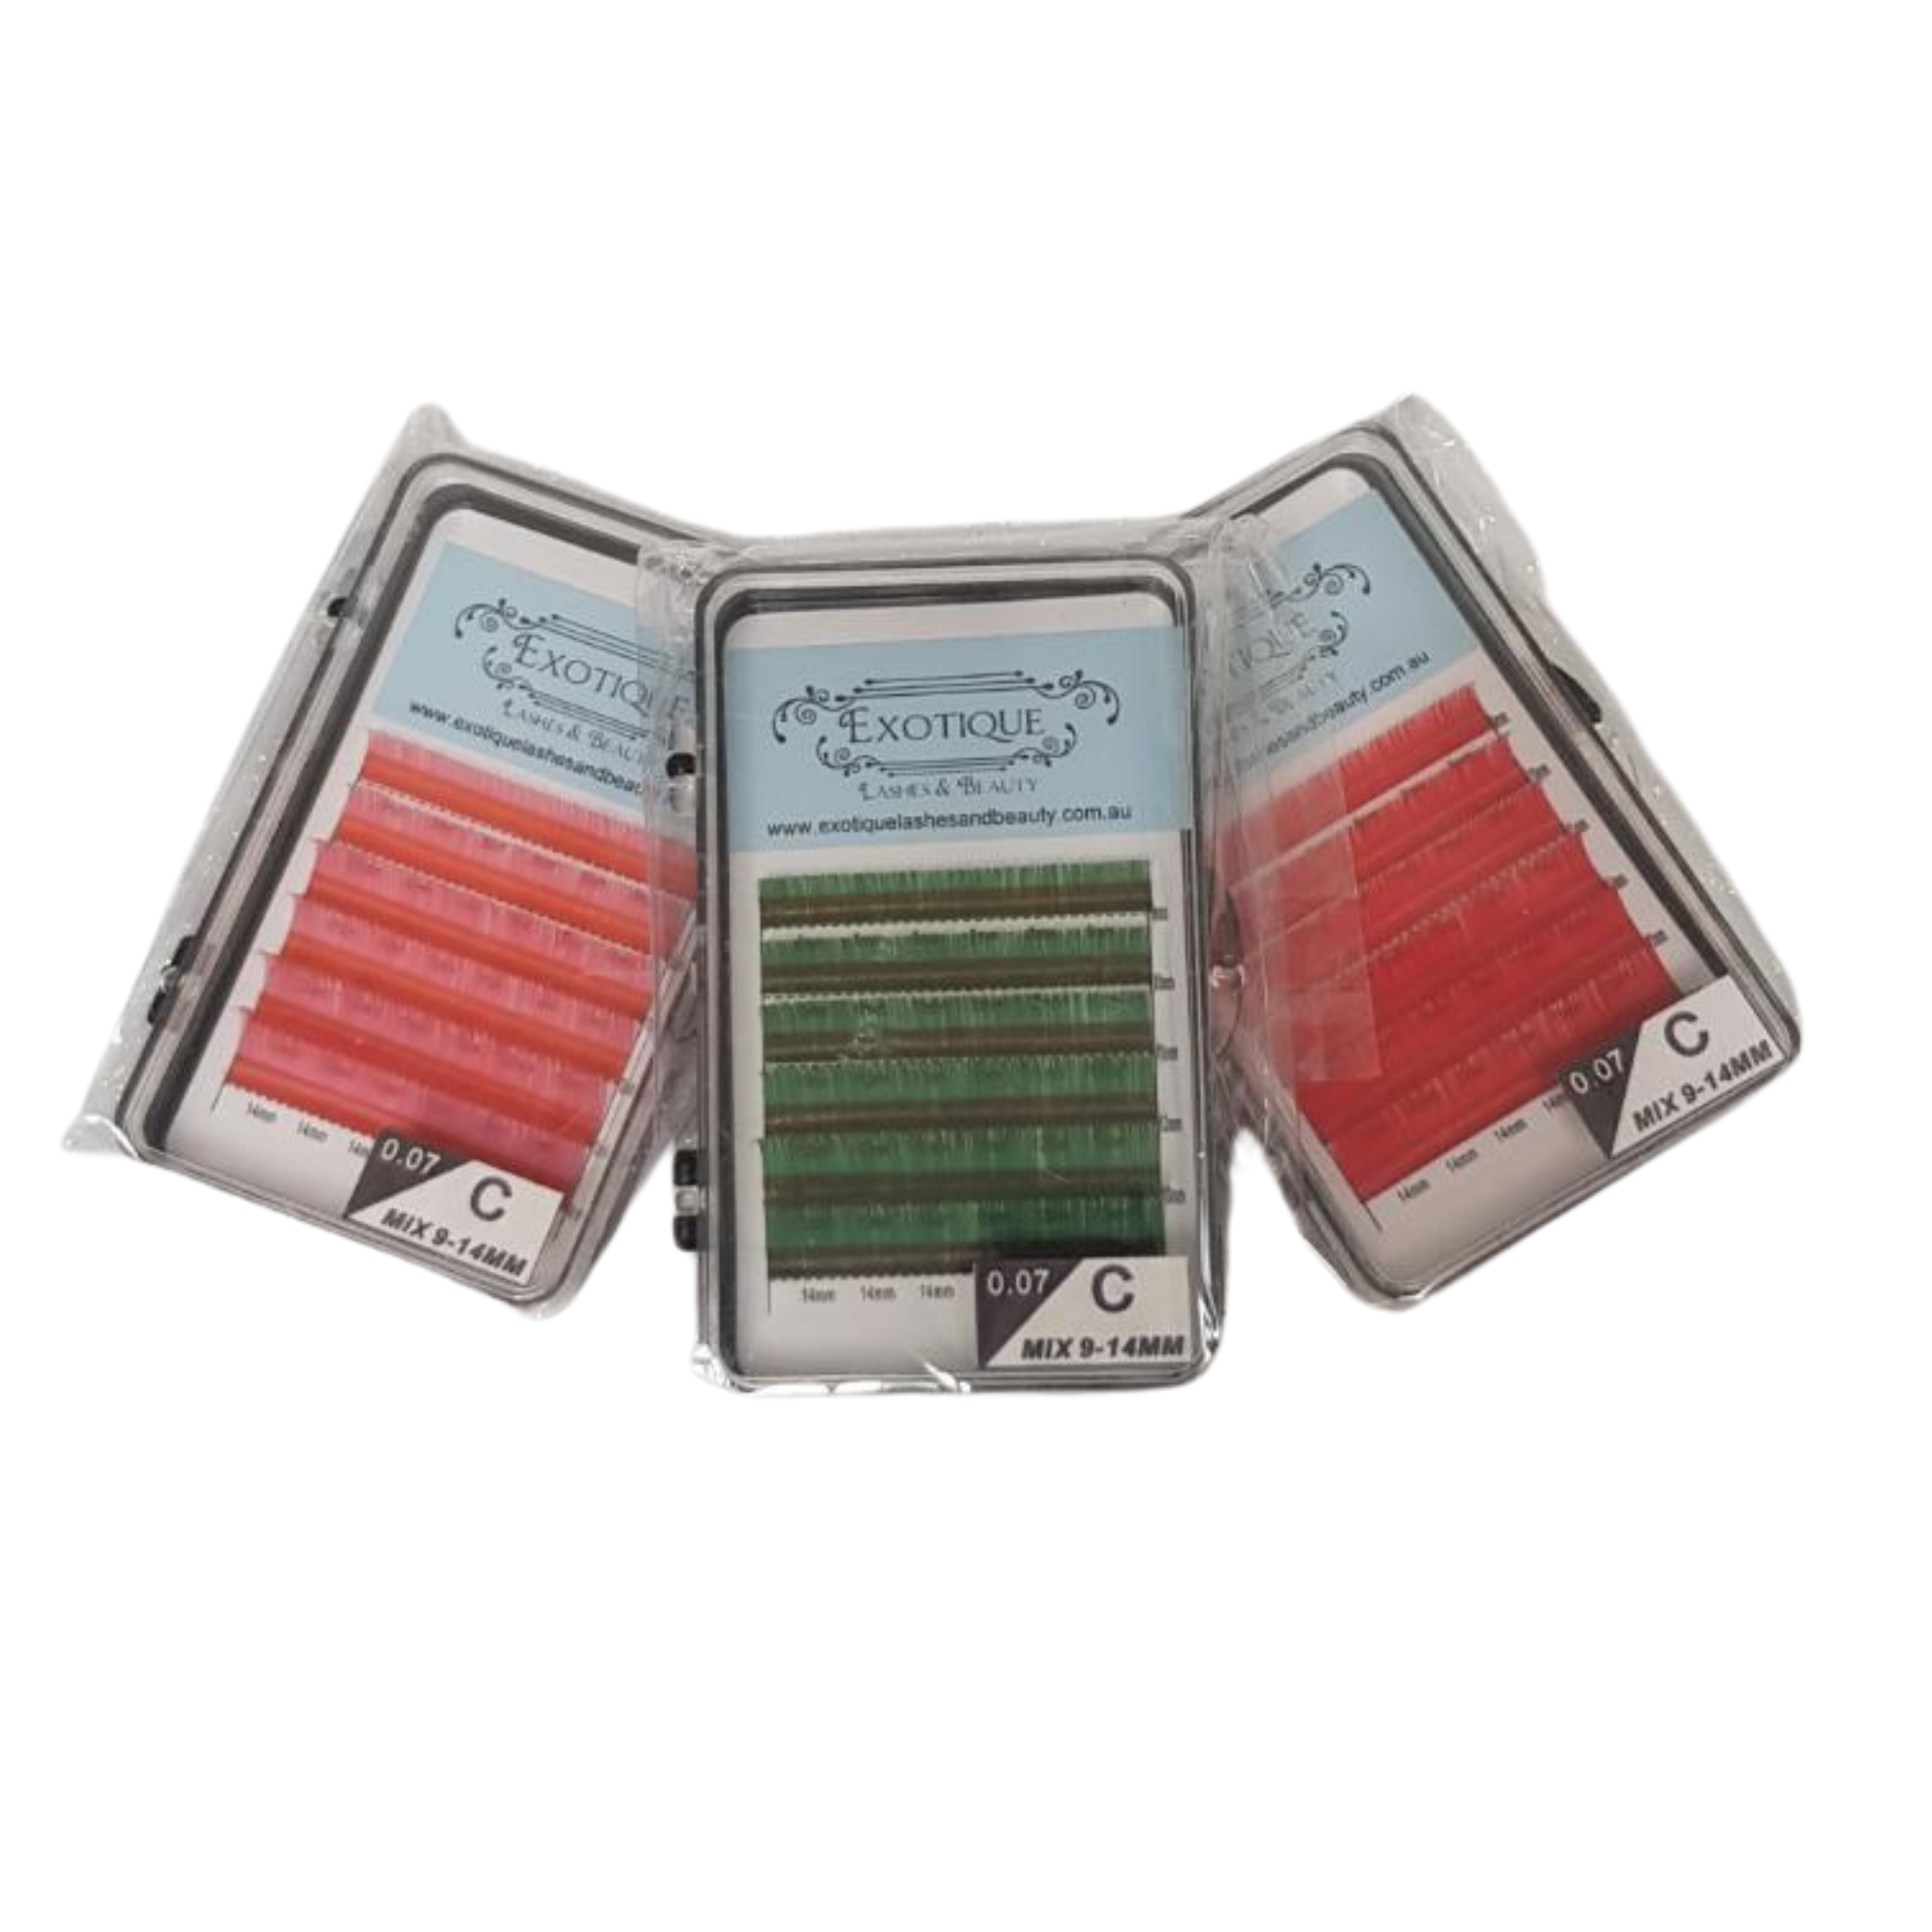 Coloured Lash Trays 0.07, 3 Trays of coloured Lashes - On Sale